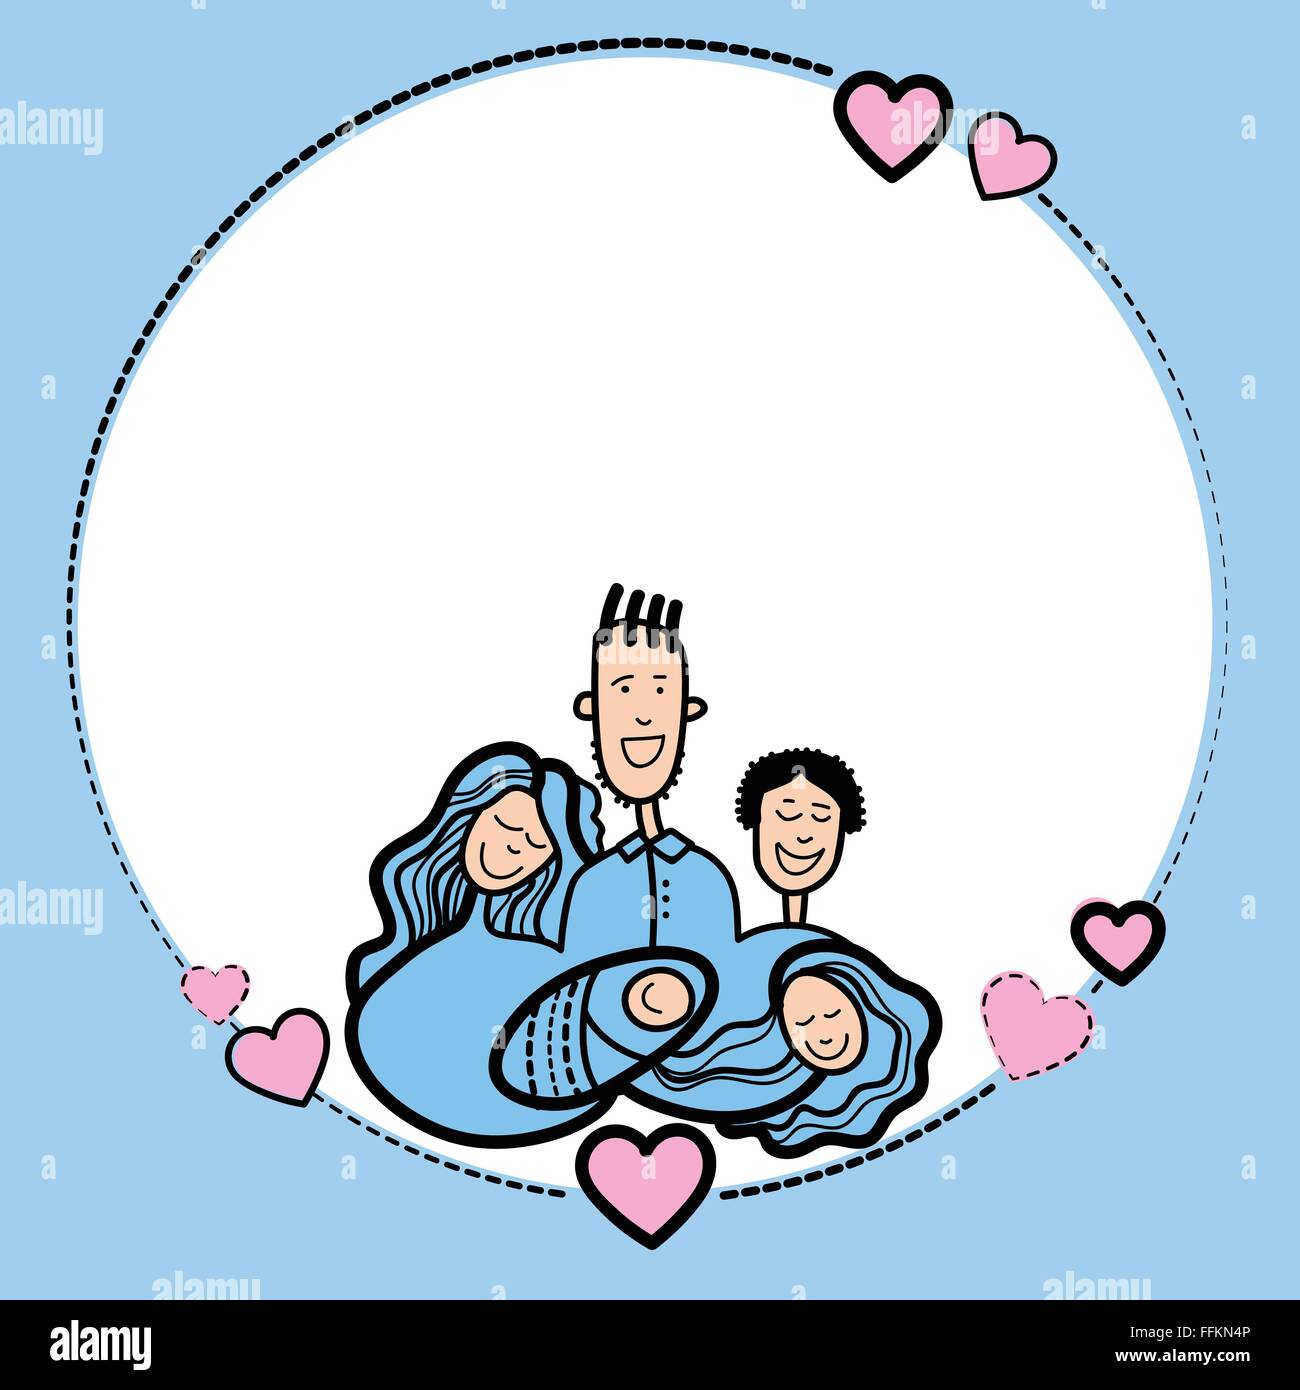 Sketch Frame Hand Draw Family Parents Kids Heart Shape Love Stock Vector